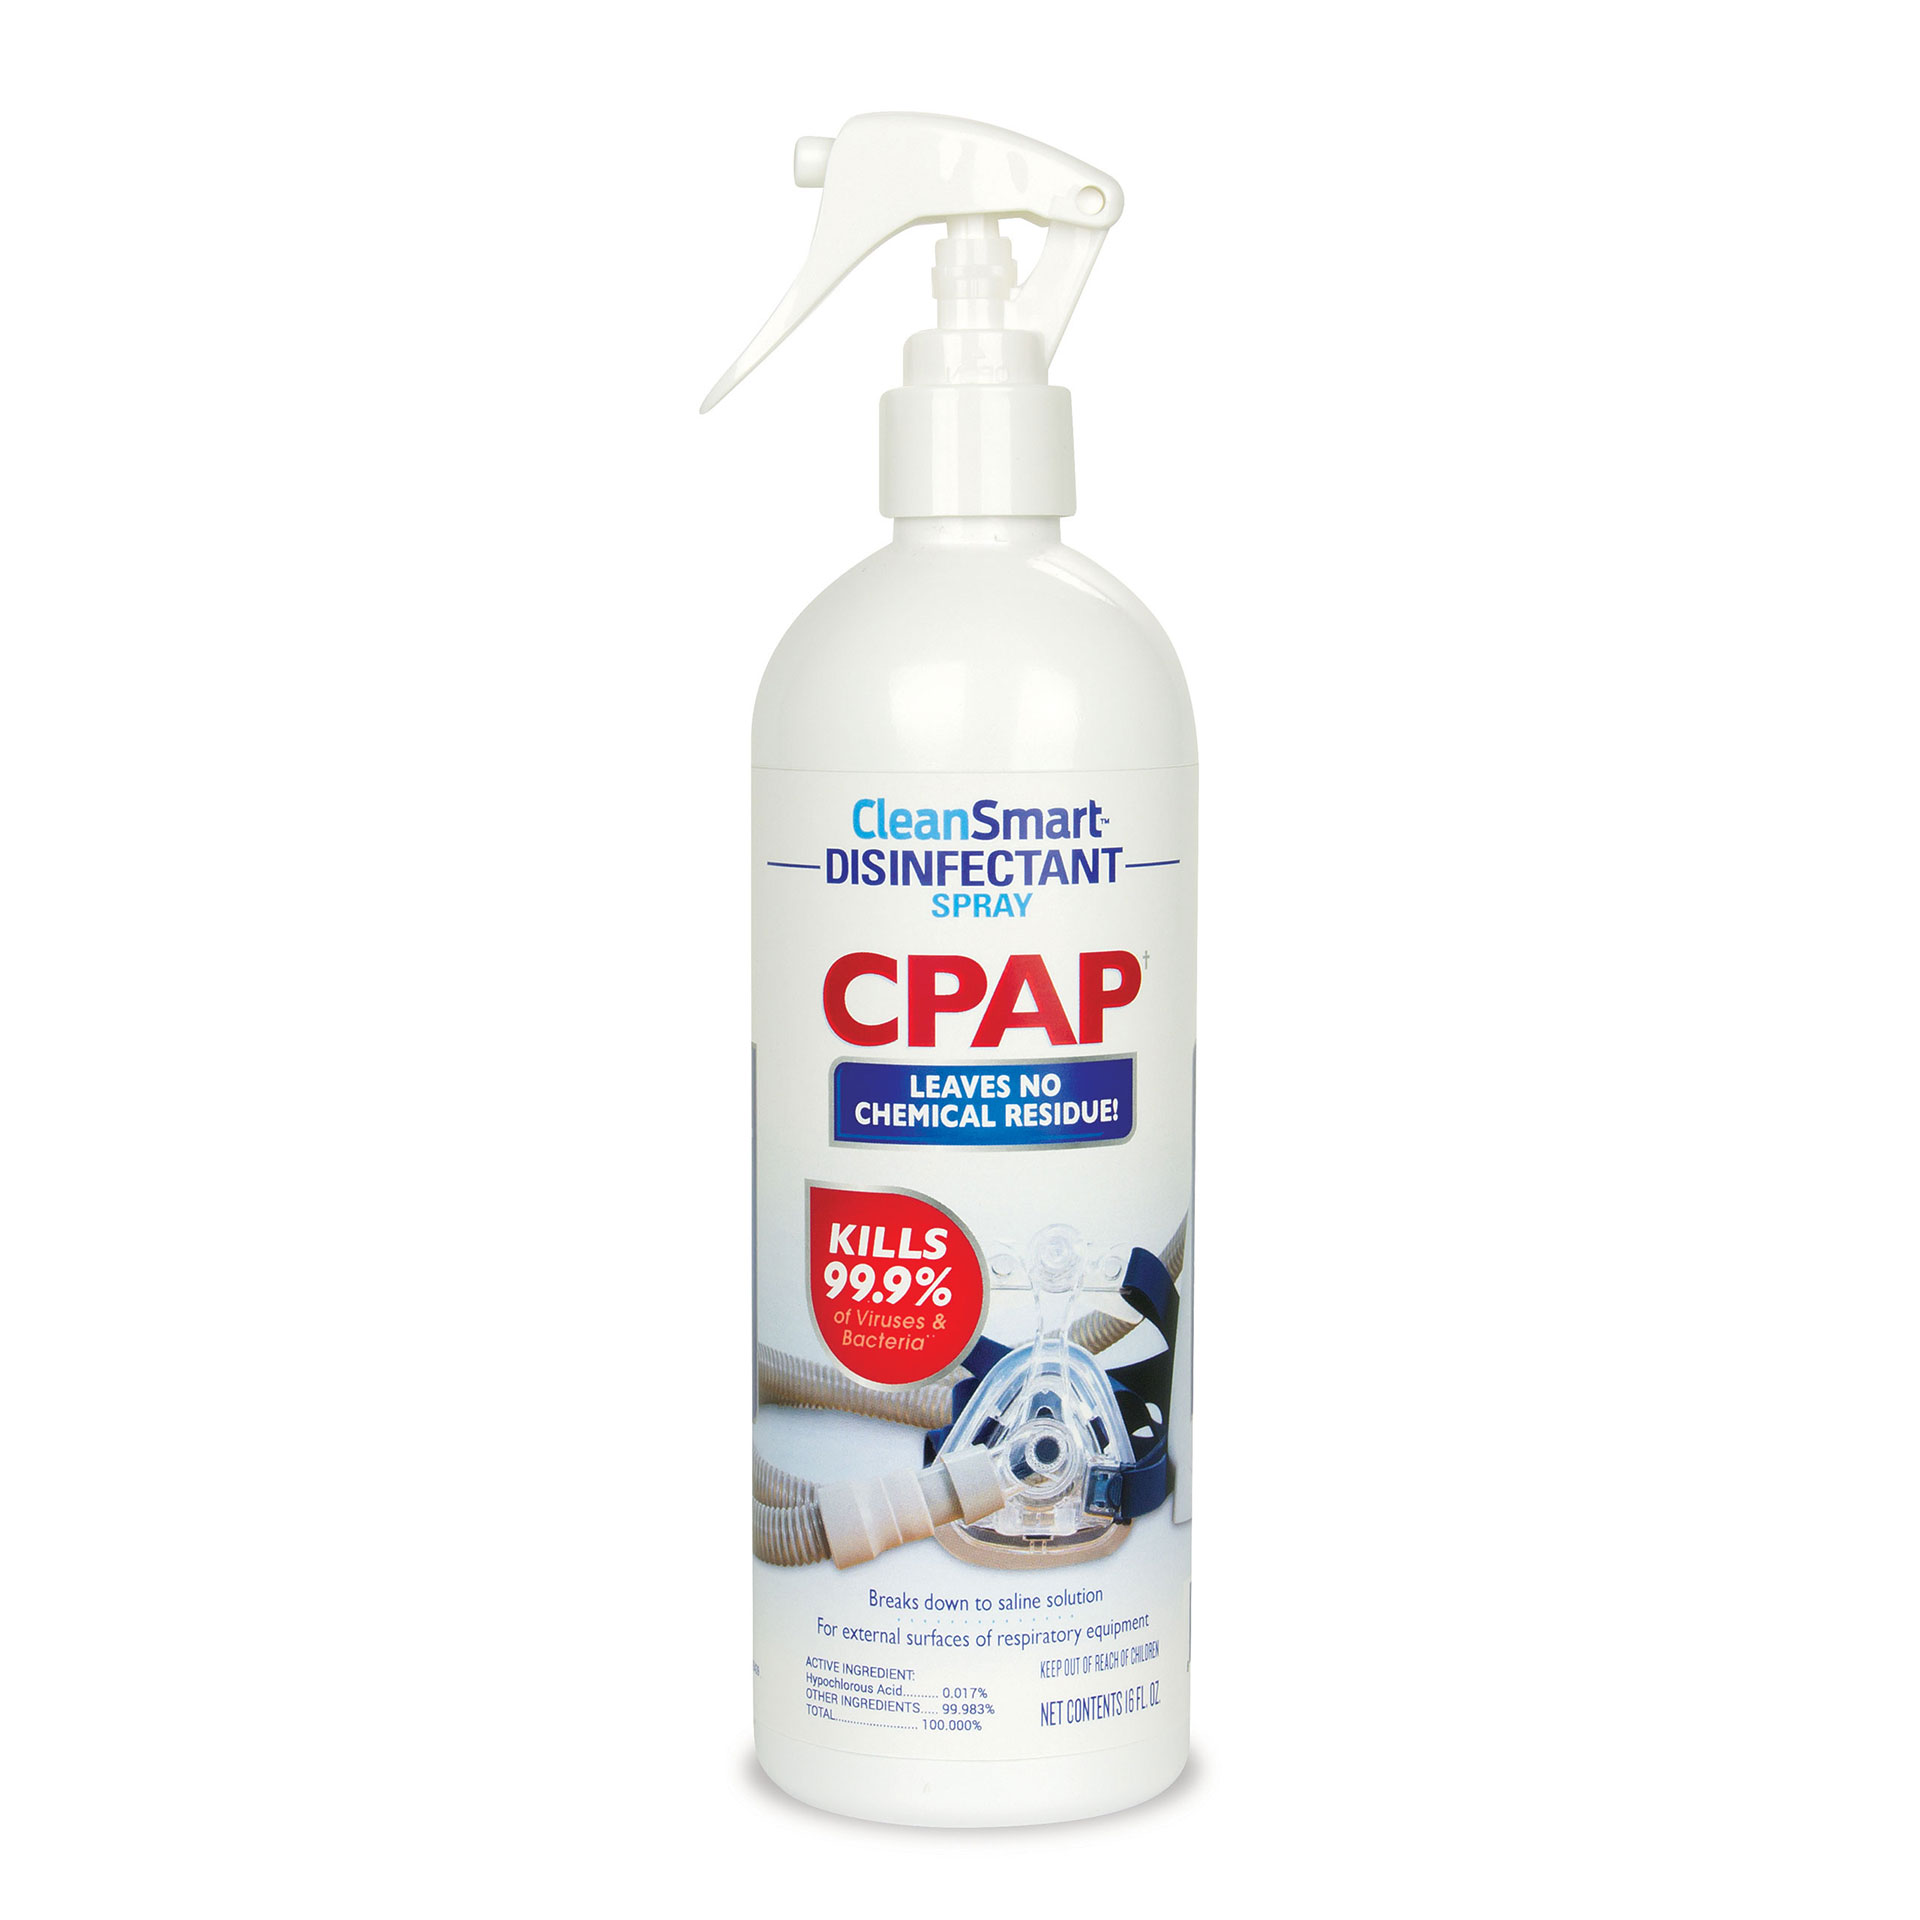 Product Image CleanSmart CPAP Disninfectant Spray 16oz